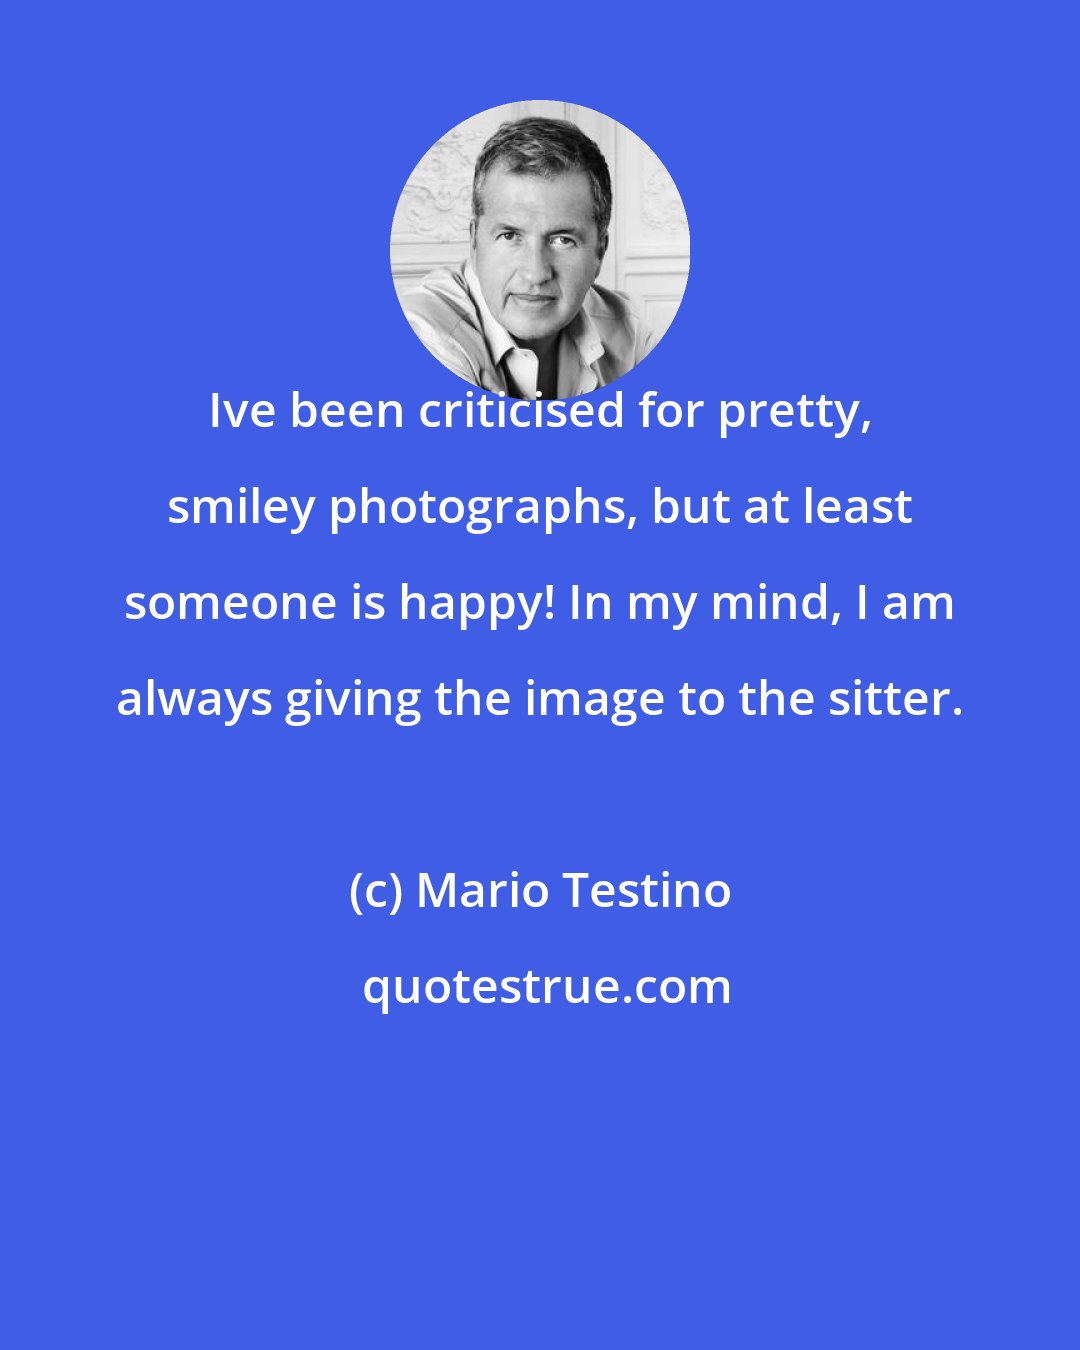 Mario Testino: Ive been criticised for pretty, smiley photographs, but at least someone is happy! In my mind, I am always giving the image to the sitter.